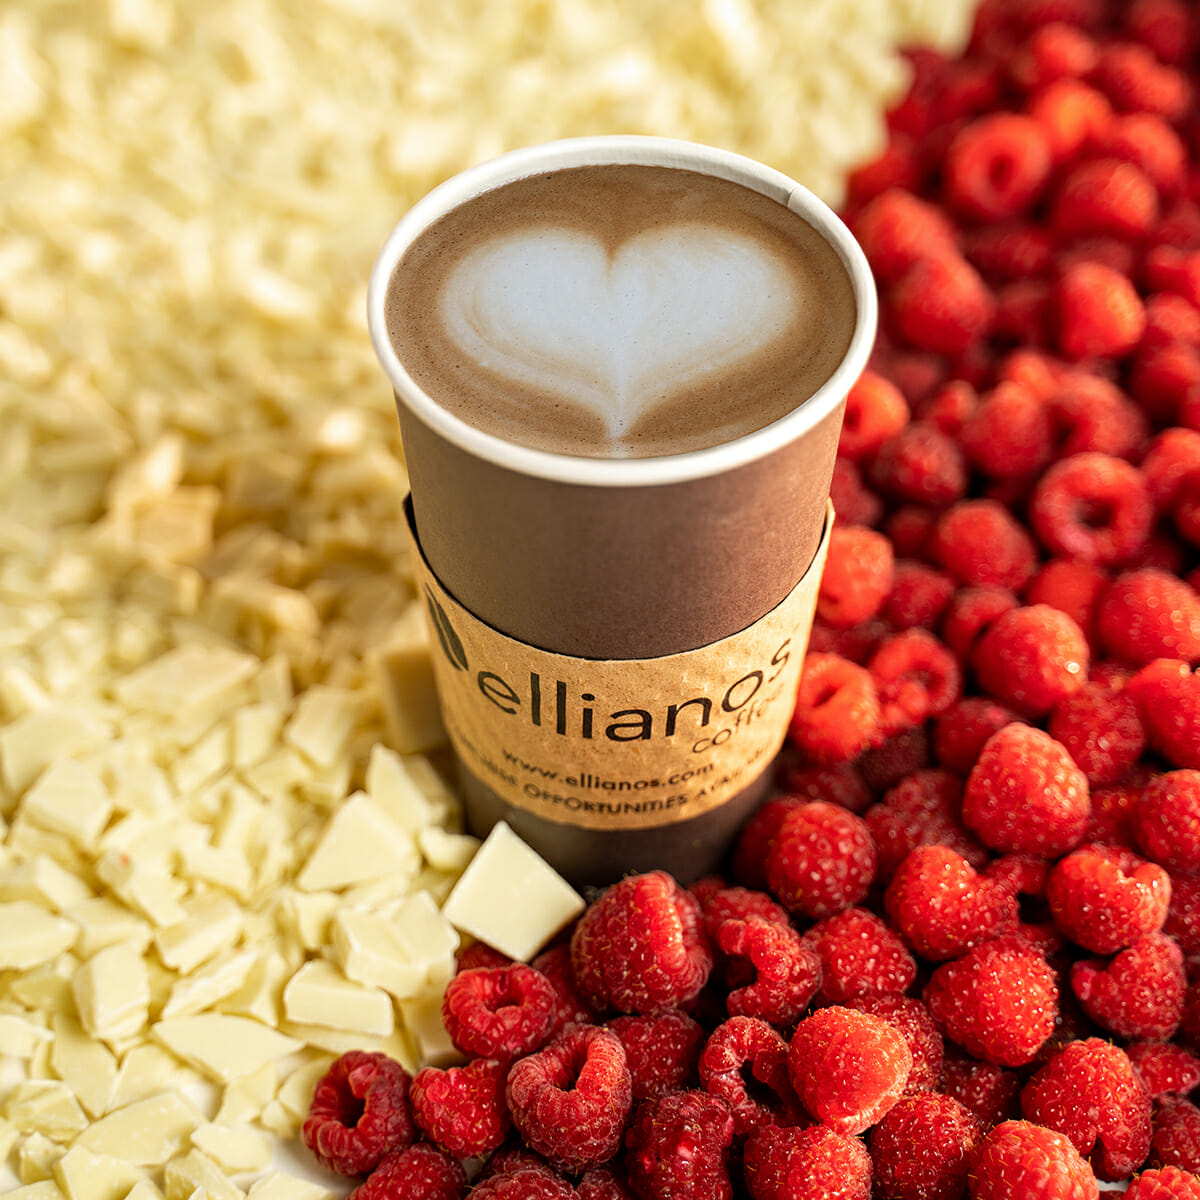 Ellianos Coffee Announces Valentine’s Day February Limited Time Offer